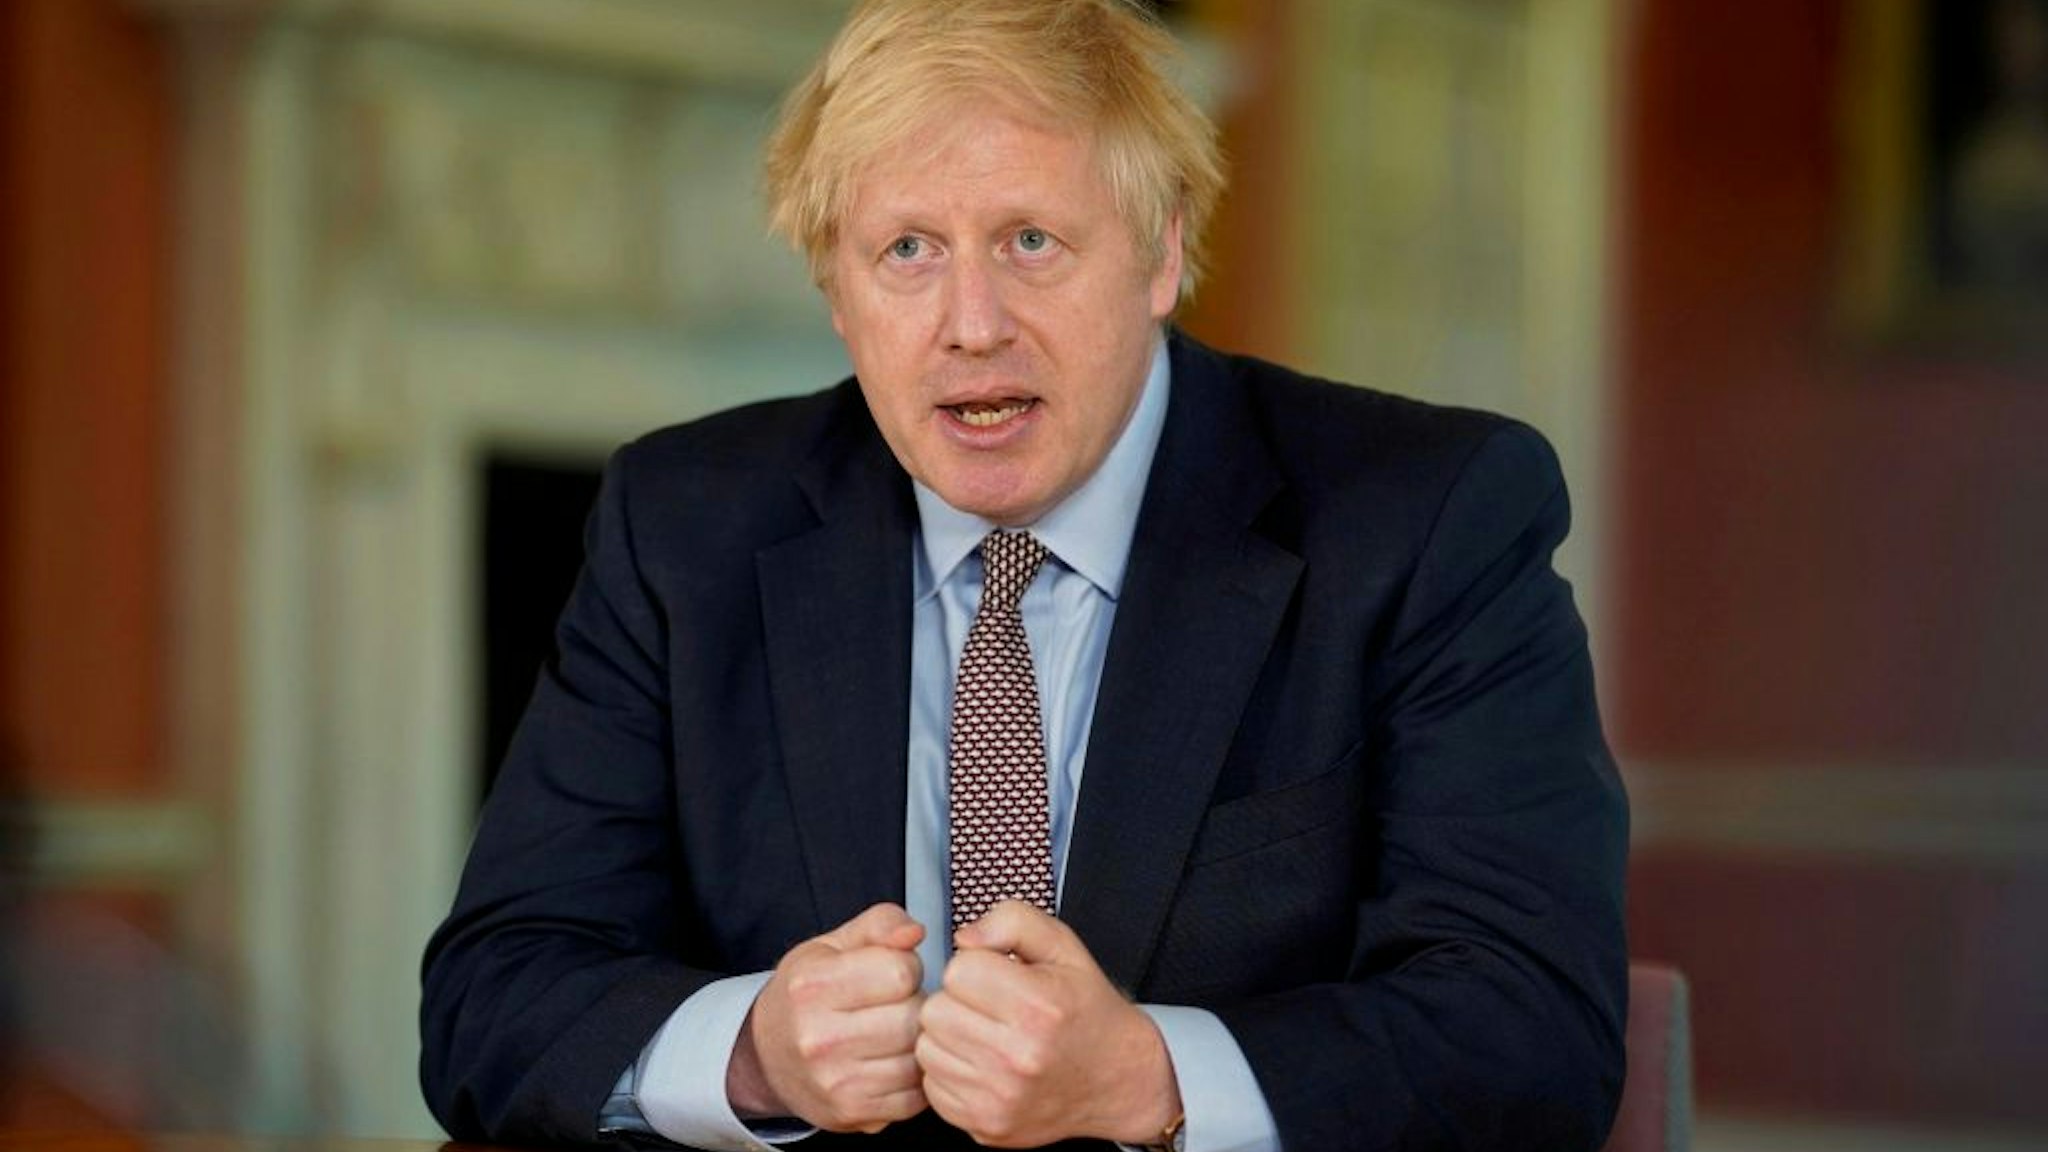 Prime Minister Boris Johnson records a televised message to the nation released on May 10, 2020 in London, England.